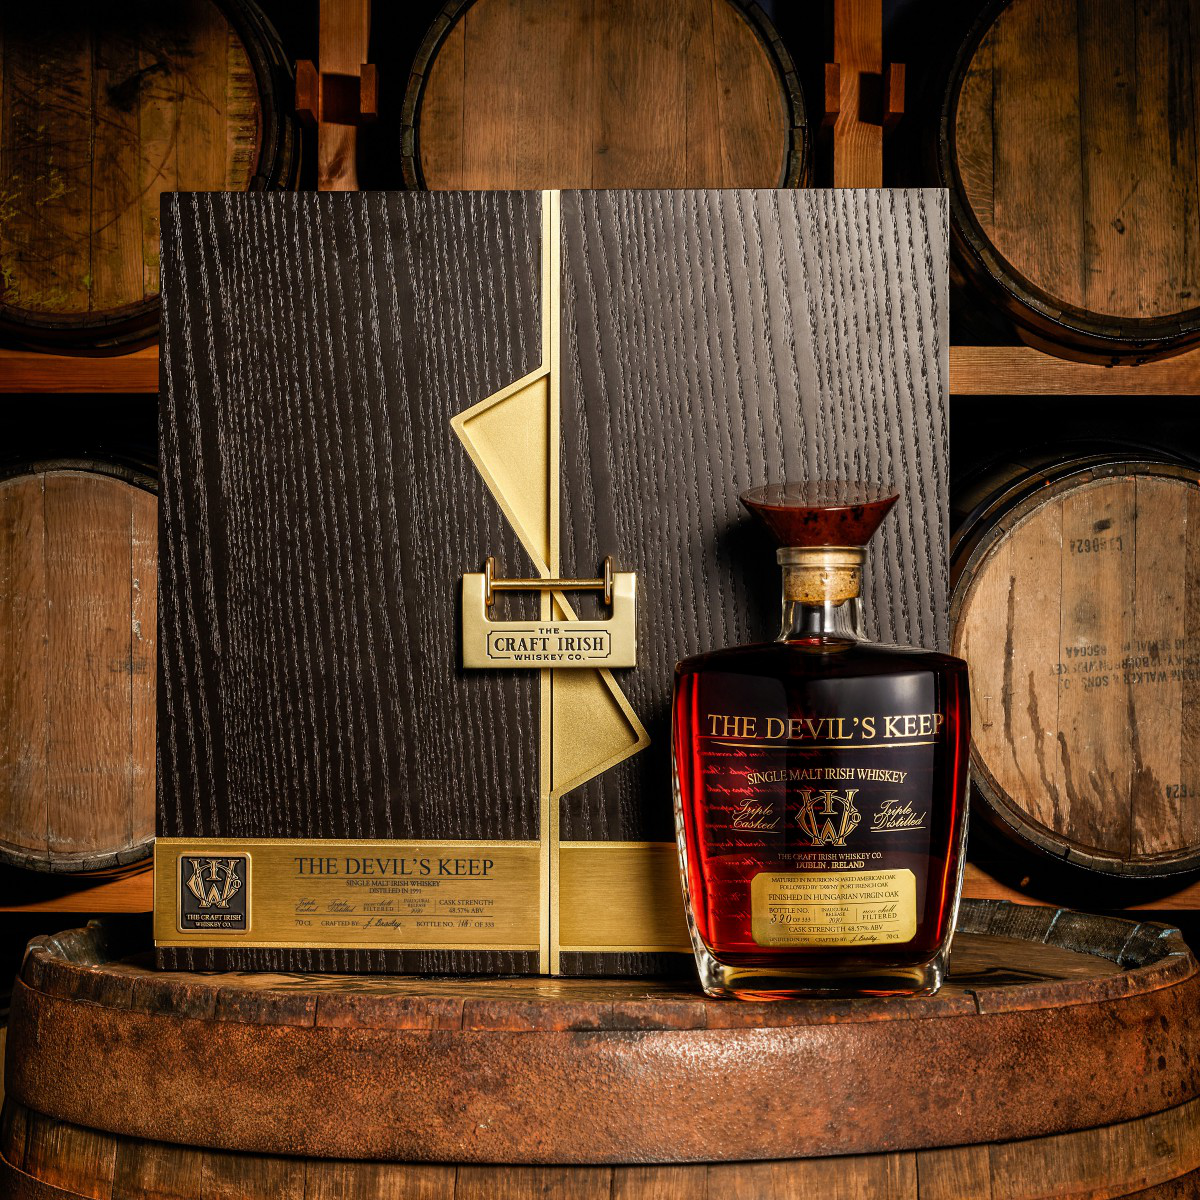 Tiago Russo wins Golden at the prestigious A' Packaging Design Award with The Devil's Keep Ultra Rare Single Malt Irish Whiskey.